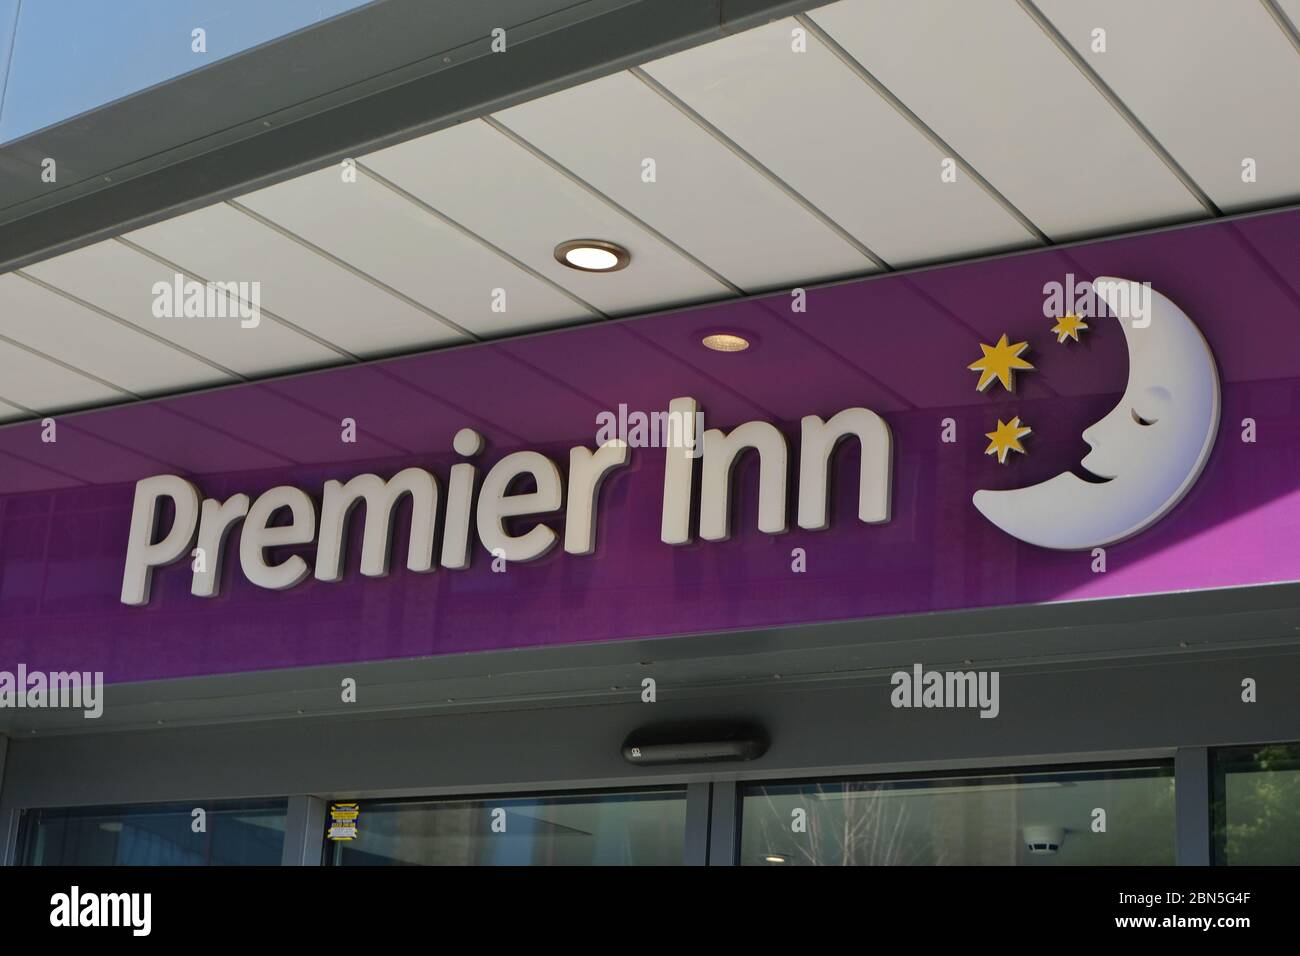 Premier Inn business sign and logo consisting of crescent moon and stars. Stock Photo